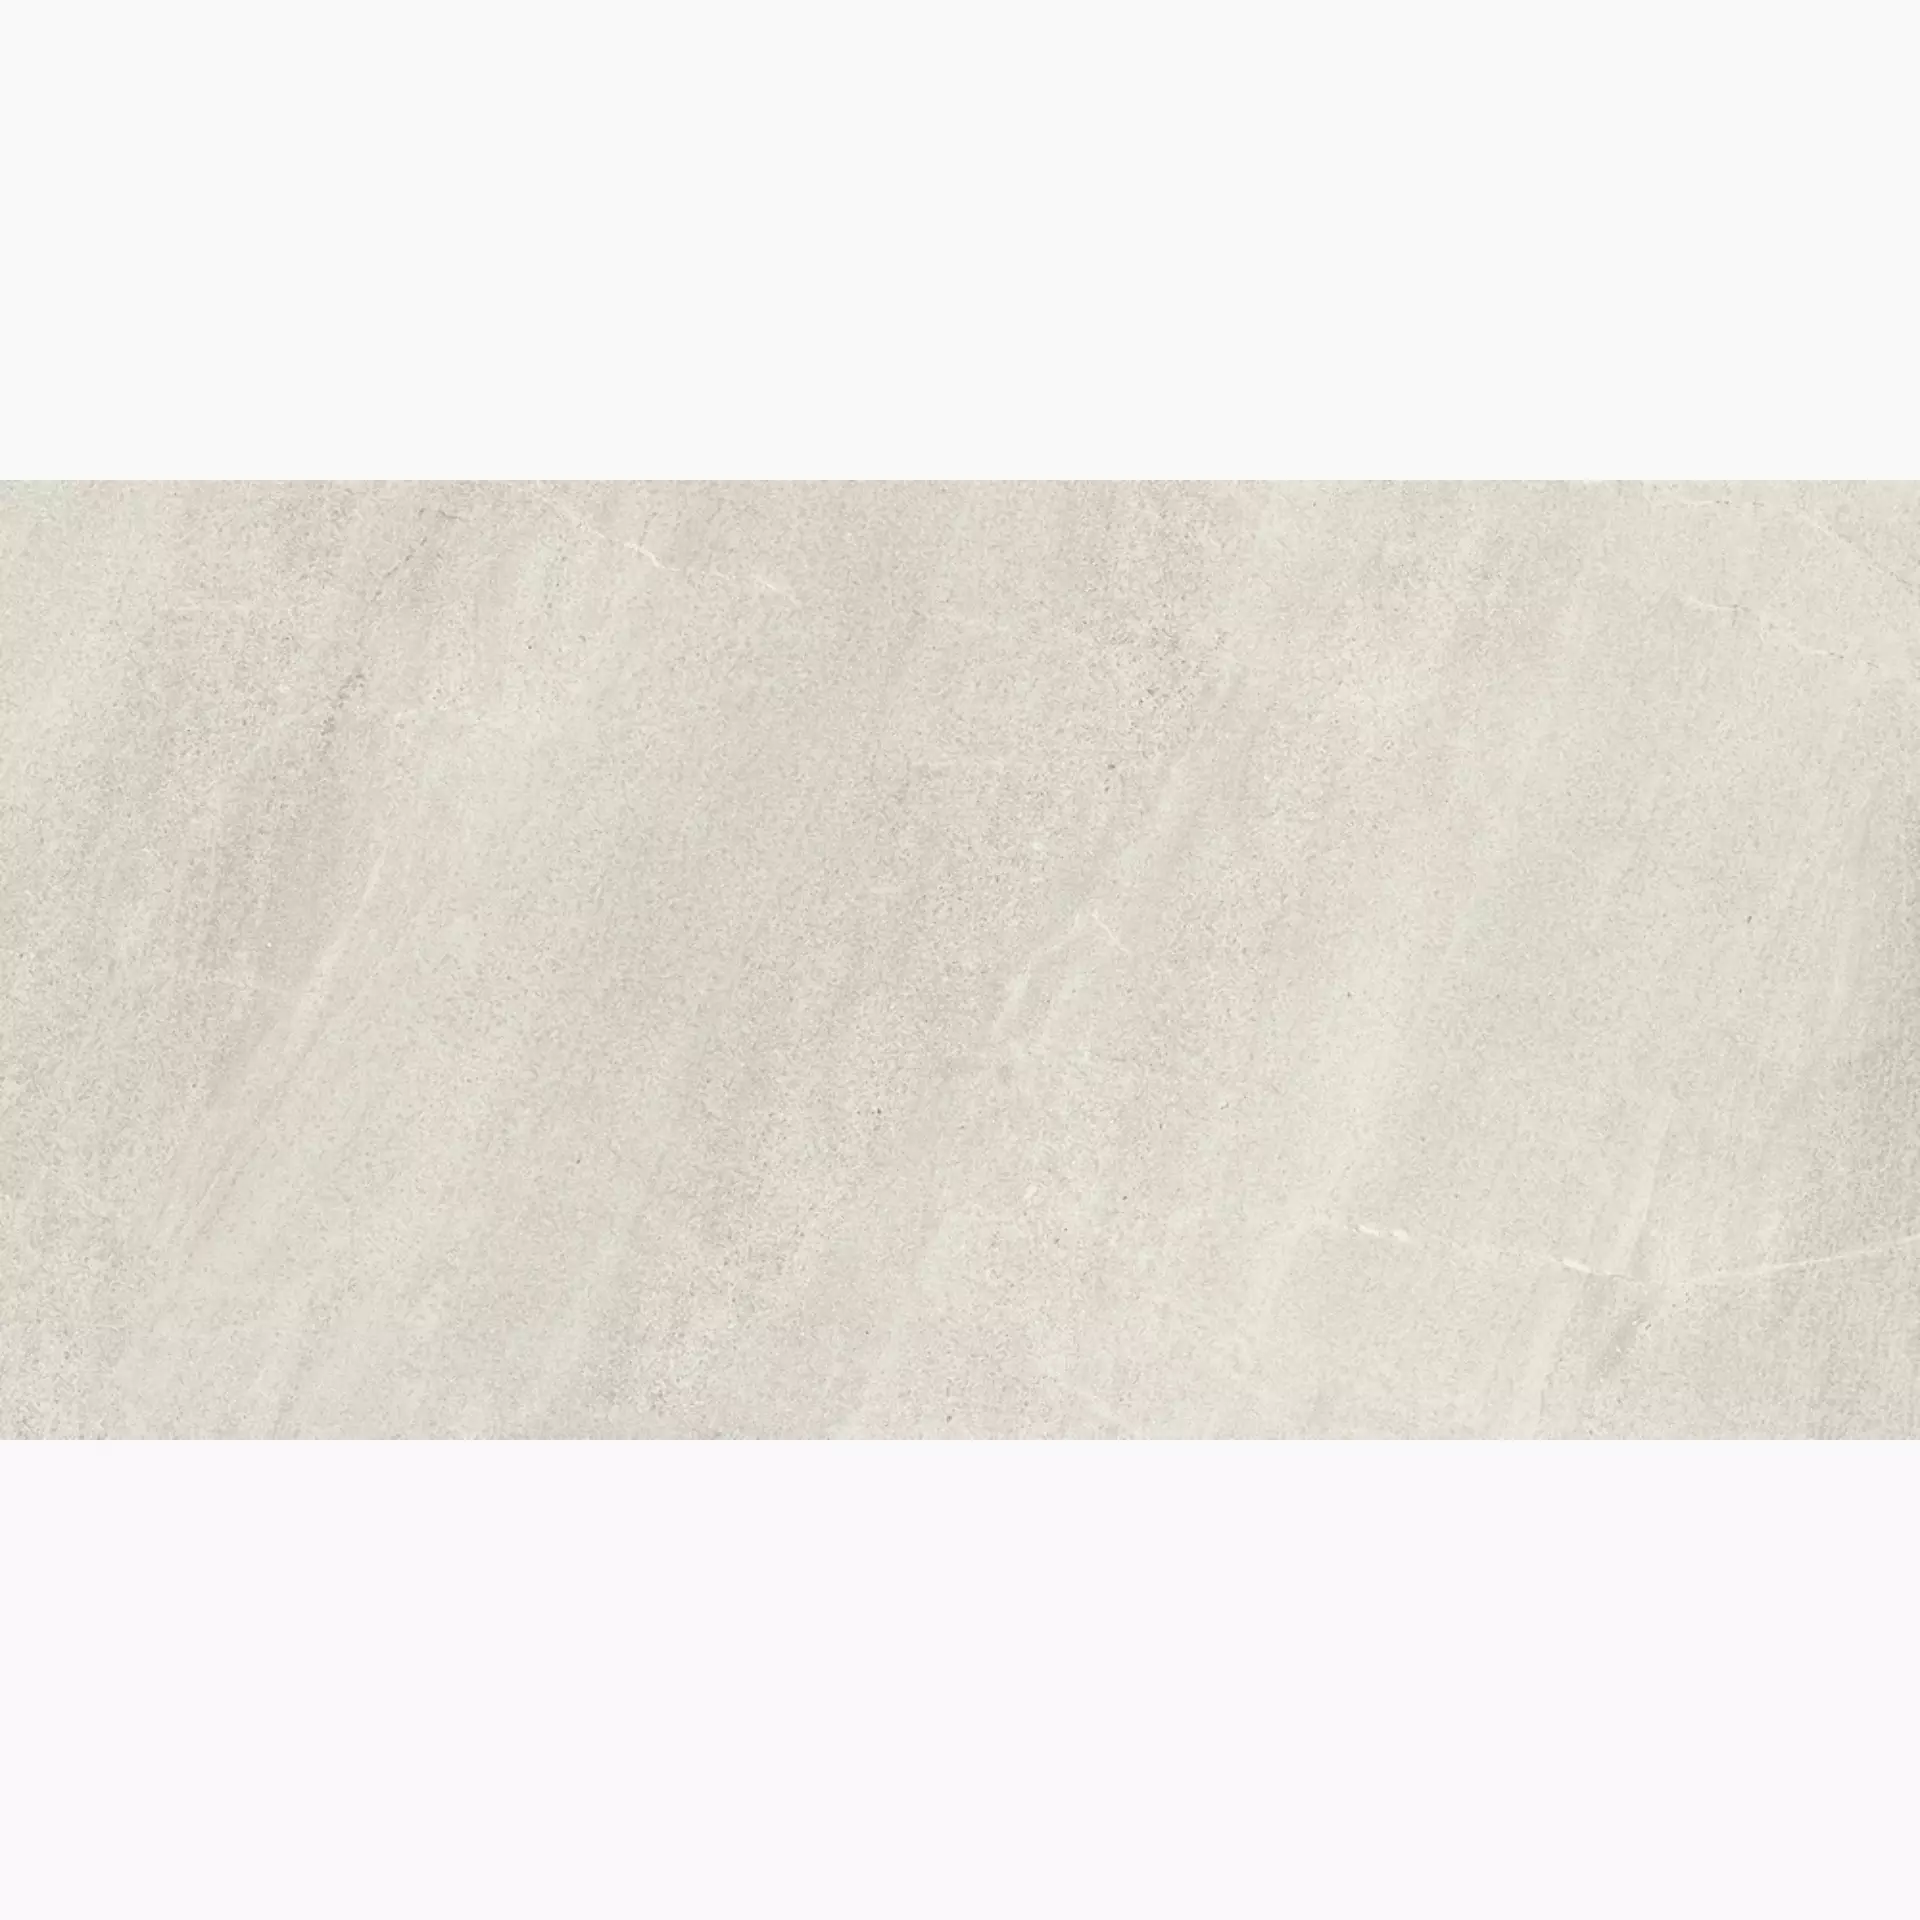 Cottodeste Limestone Clay Honed Protect EG-LSH1 30x60cm rectified 14mm